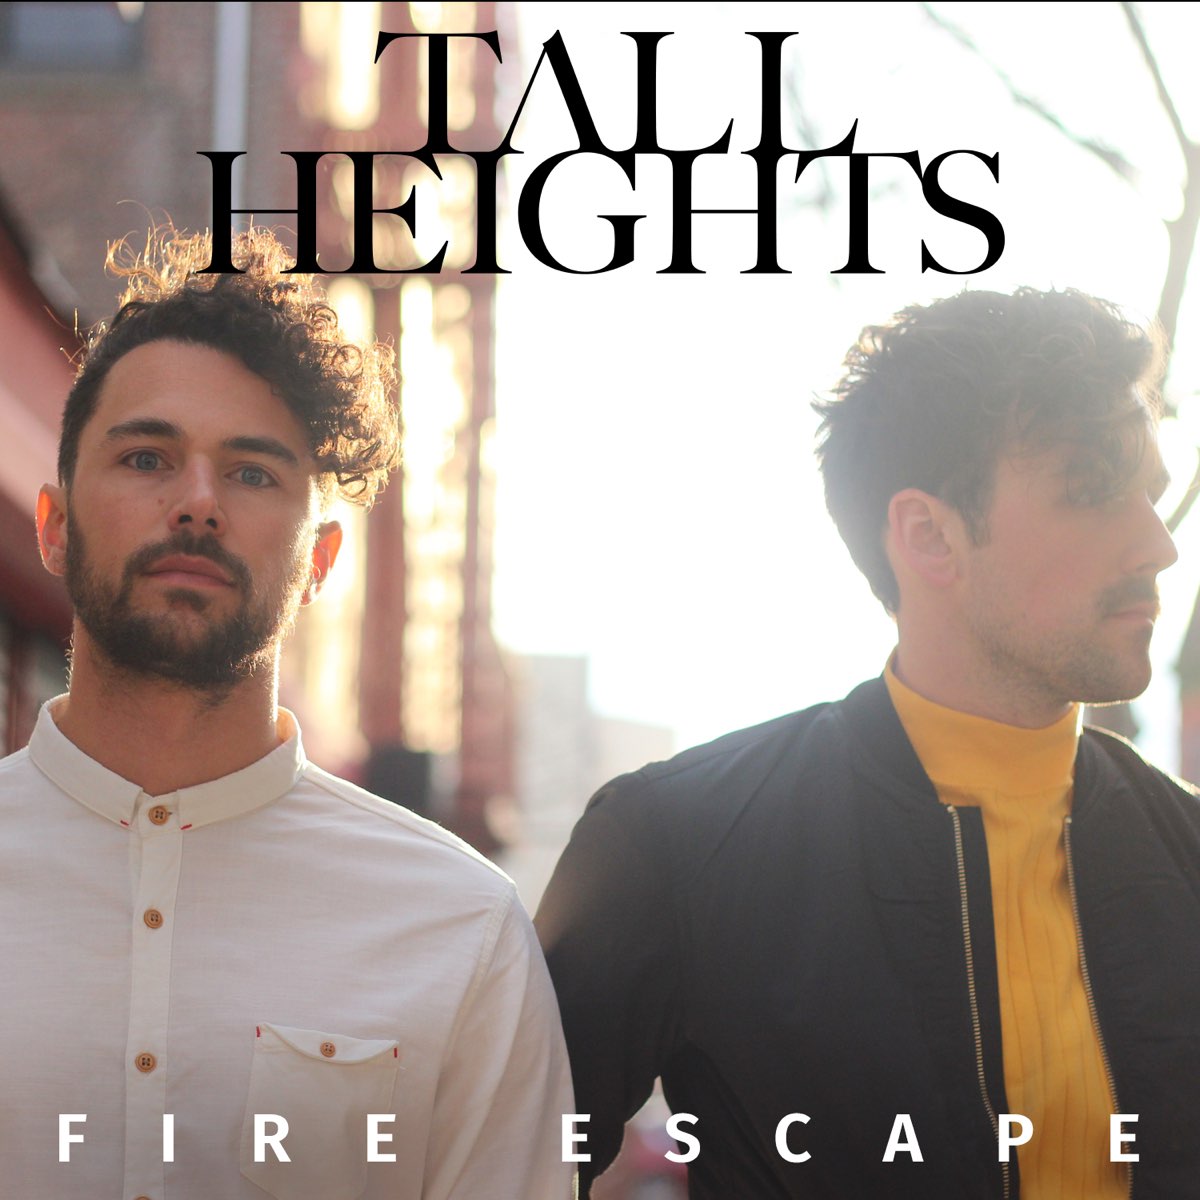 Height песни. Tall height. Eloy- Escape to the heights.